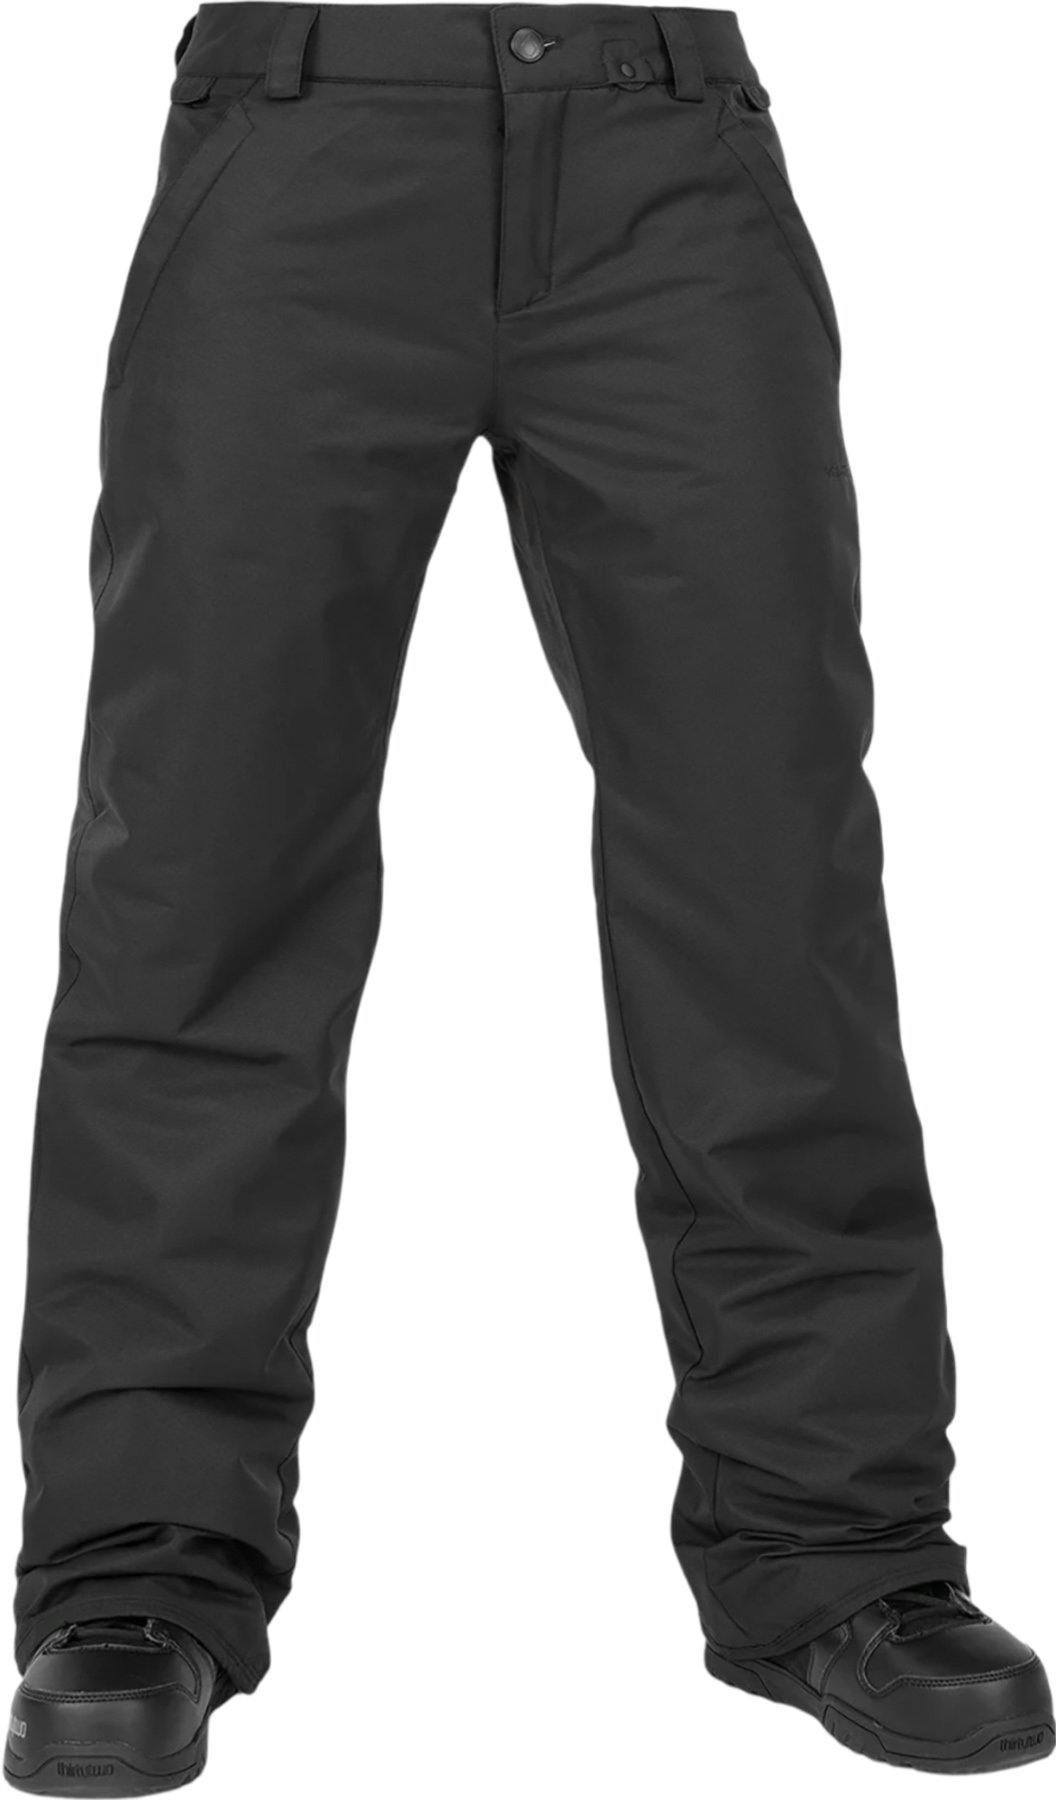 Product image for Frochickie Insulated Trousers - Women's